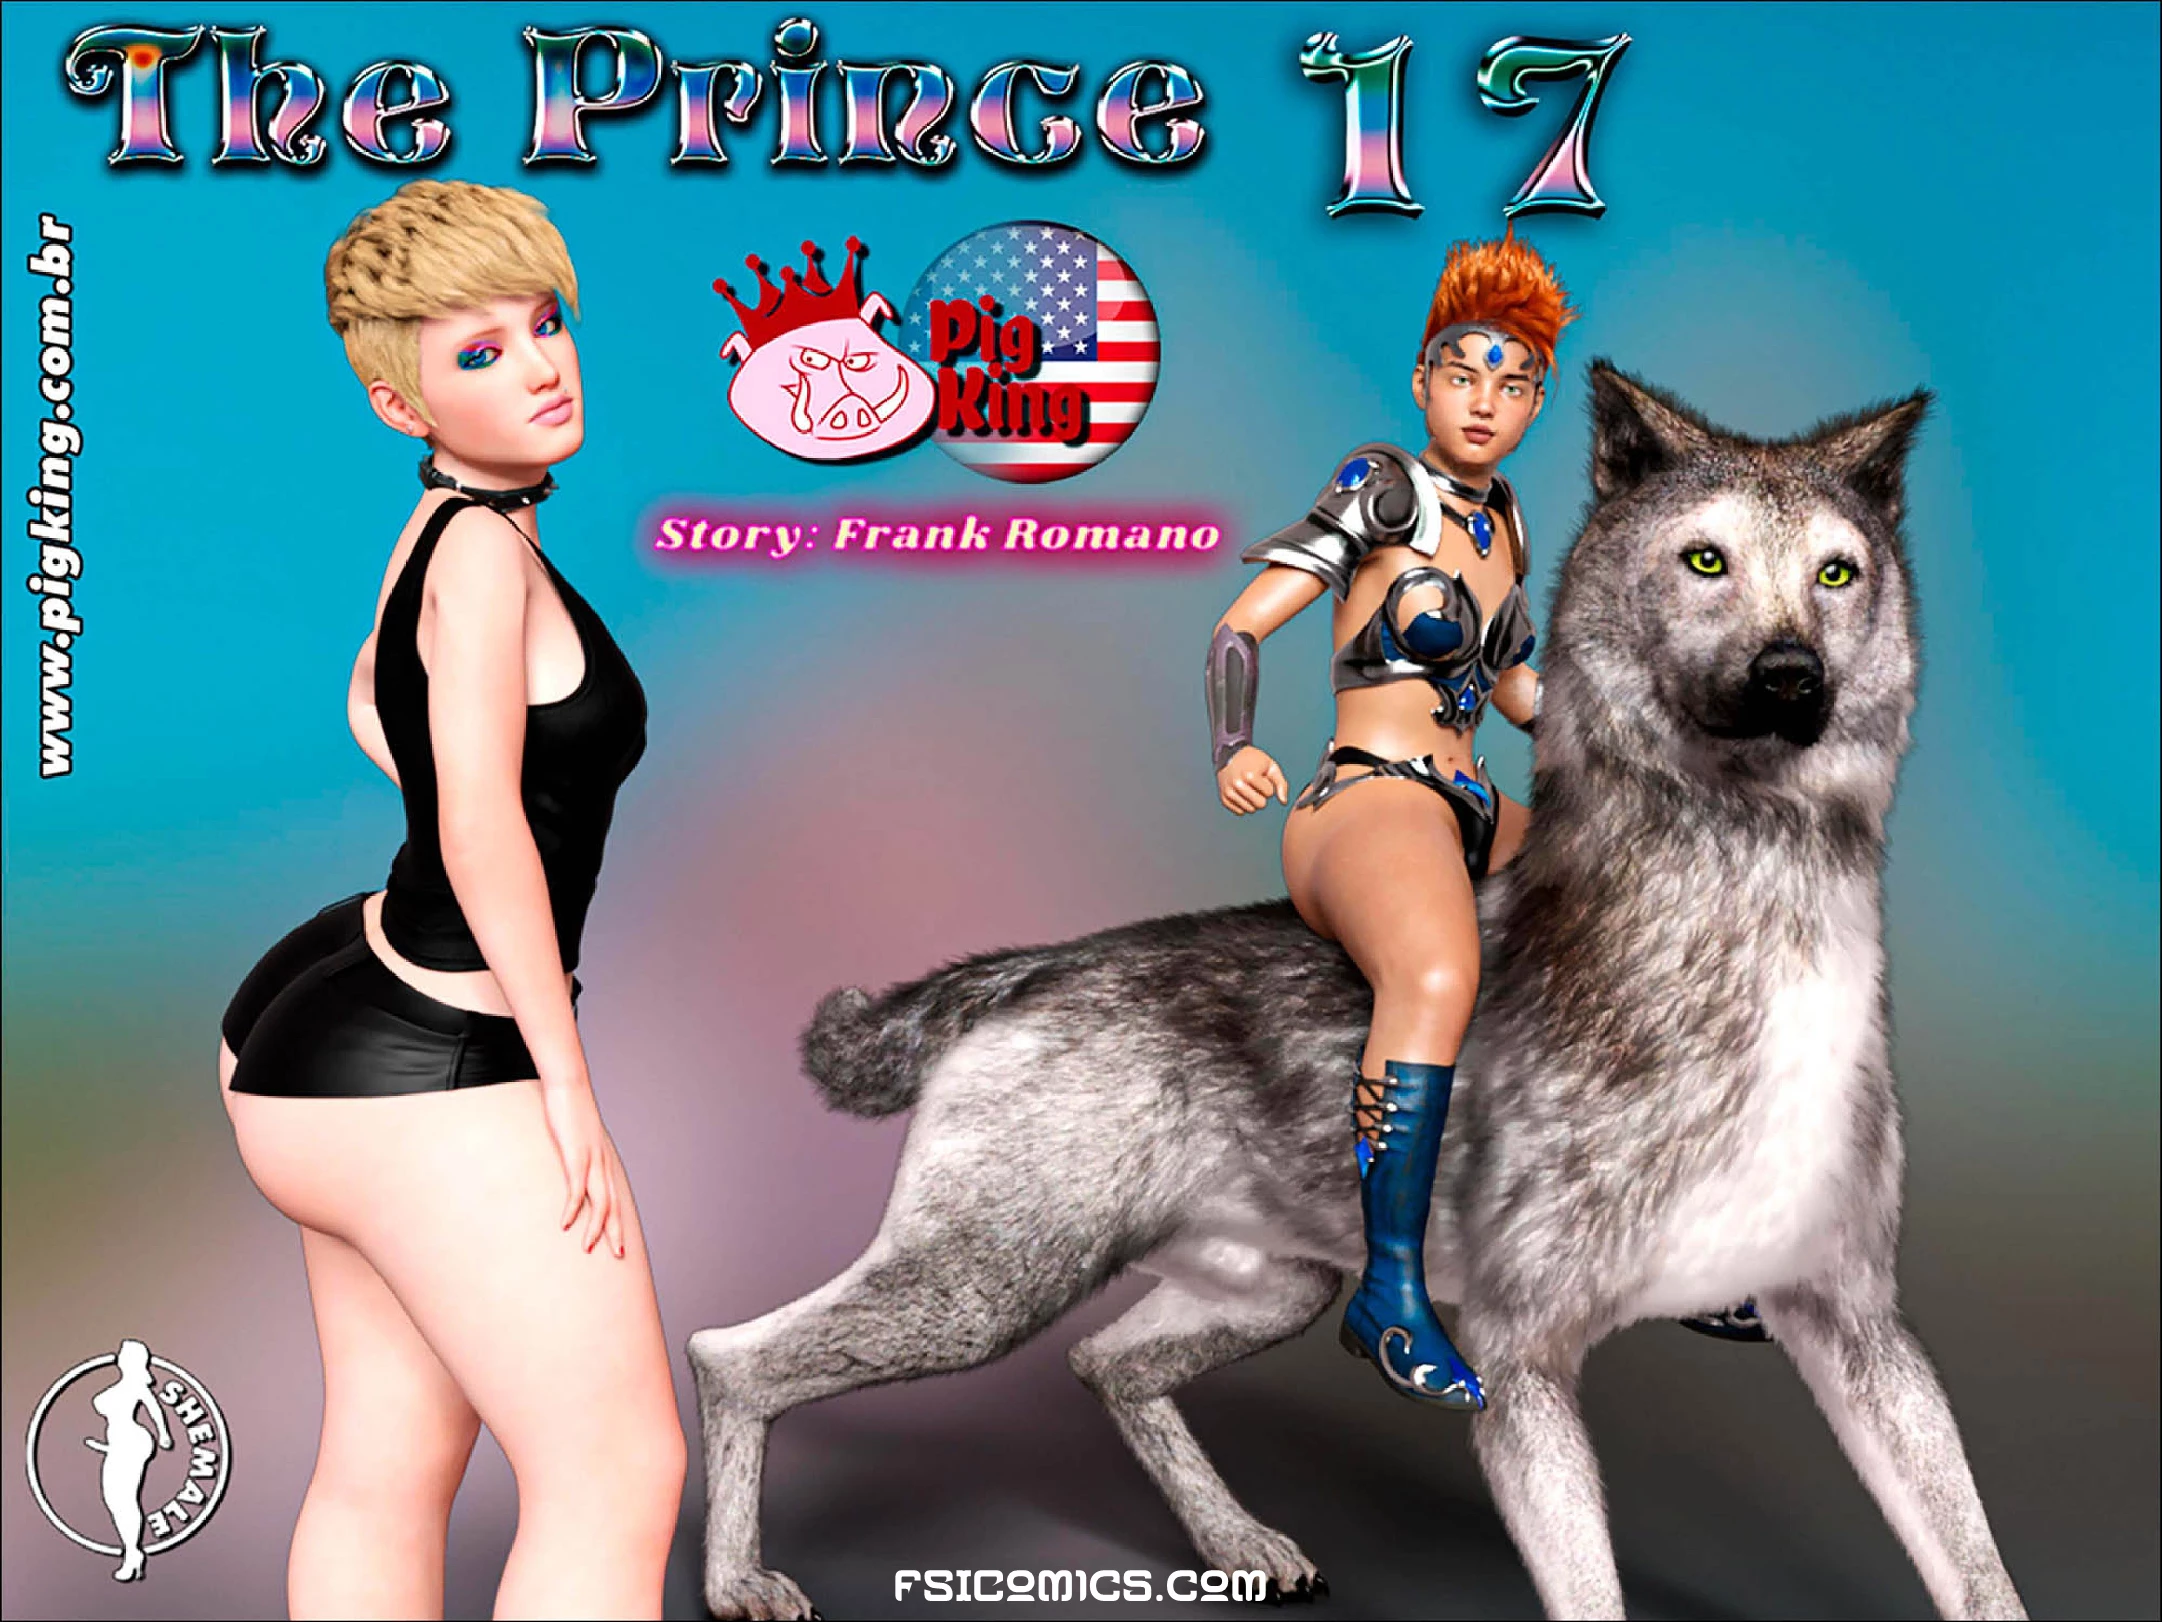 The Prince Chapter 17 – PigKing - 196 - FSIComics